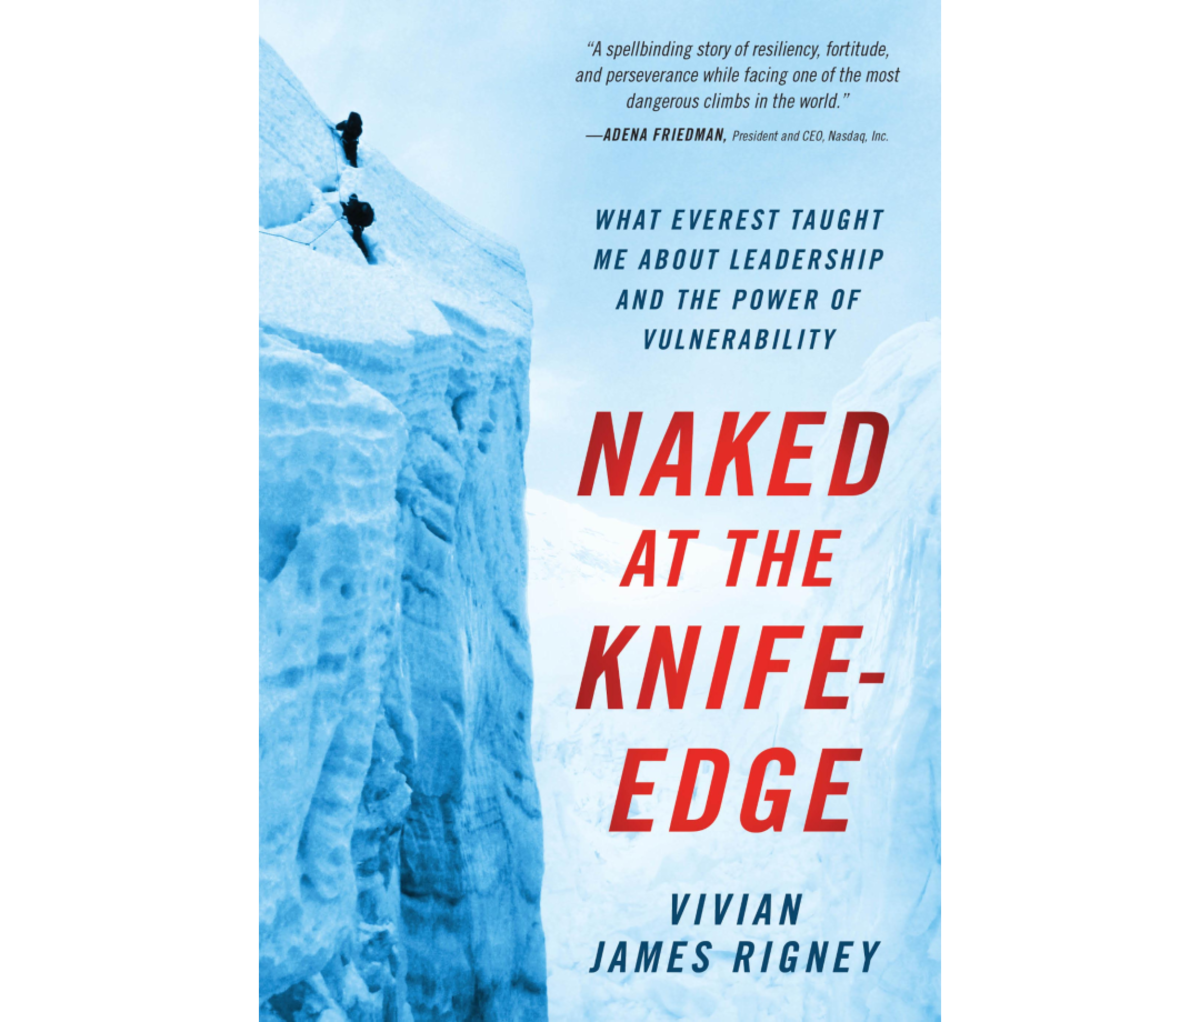 Naked at the Knife-Edge: What Everest Taught Me About Leadership and the Power of Vulnerability by Vivian James Rigney